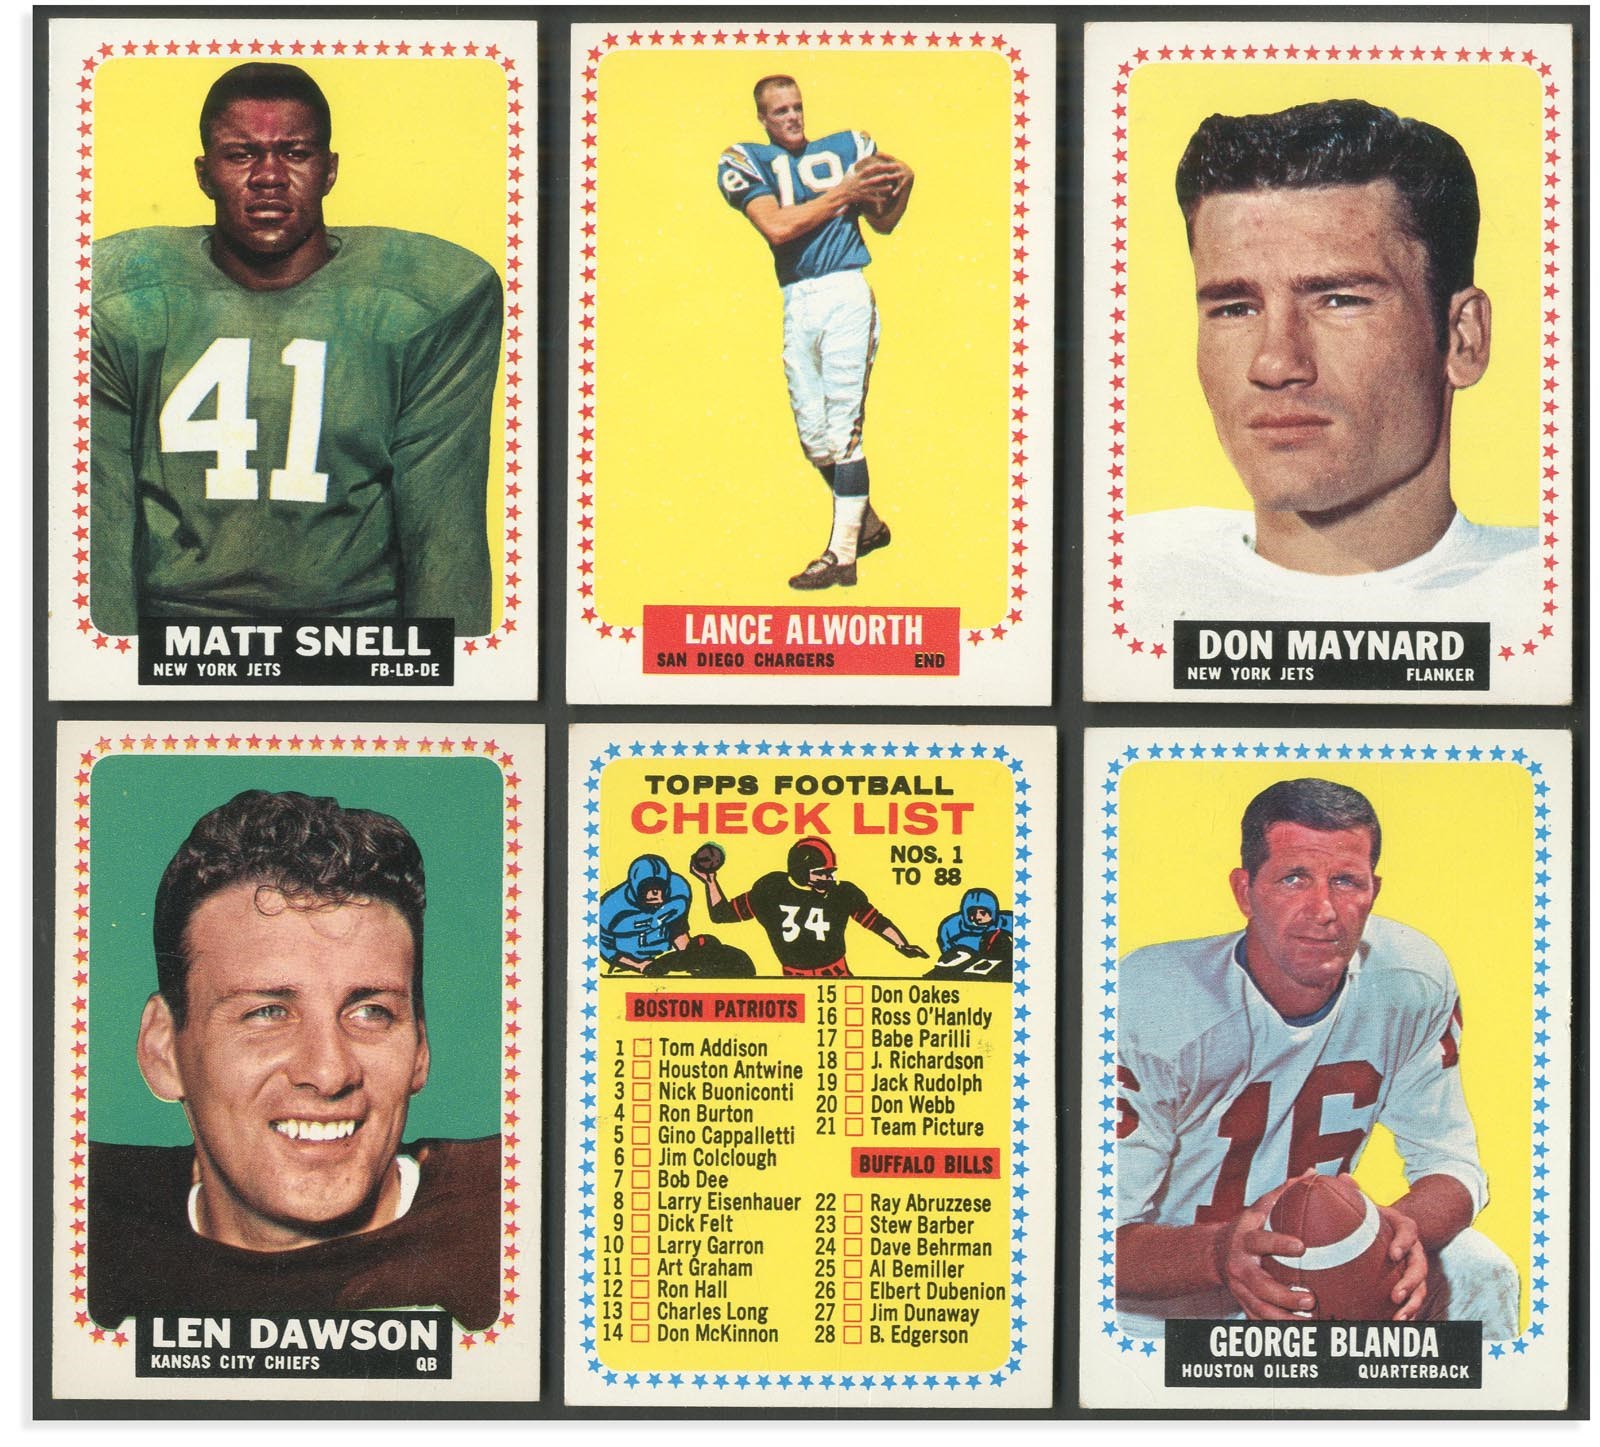 Baseball and Trading Cards - 1964 Topps Football Near Complete Set (174/176)